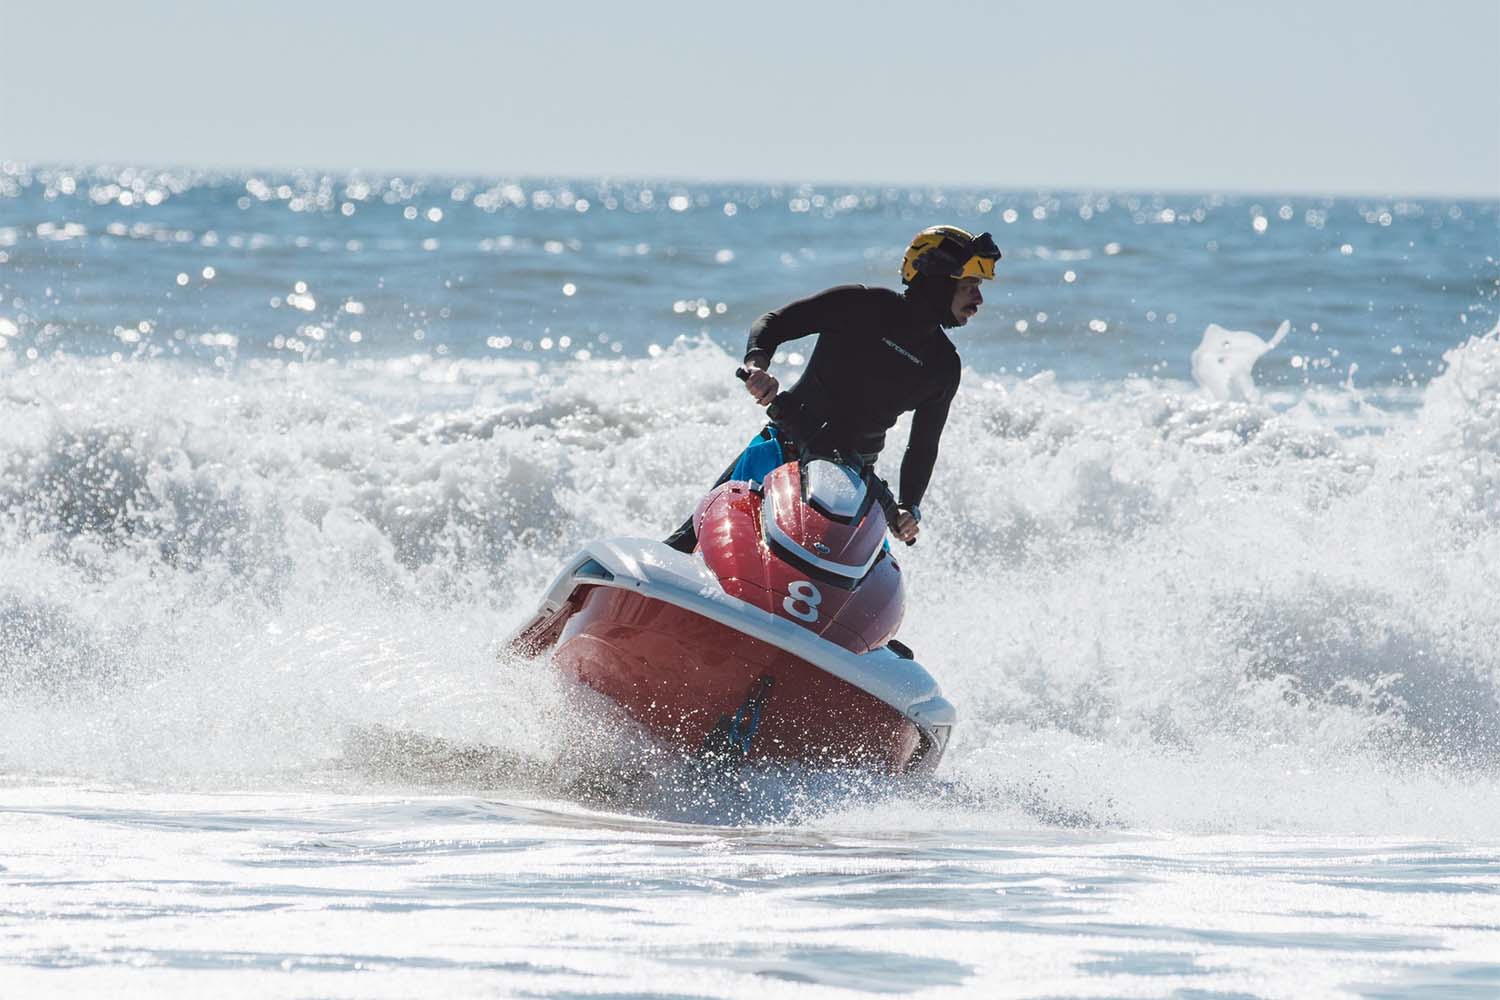 Lifeguards Prepare for 2022 Summer Season with New Rescue Watercrafts